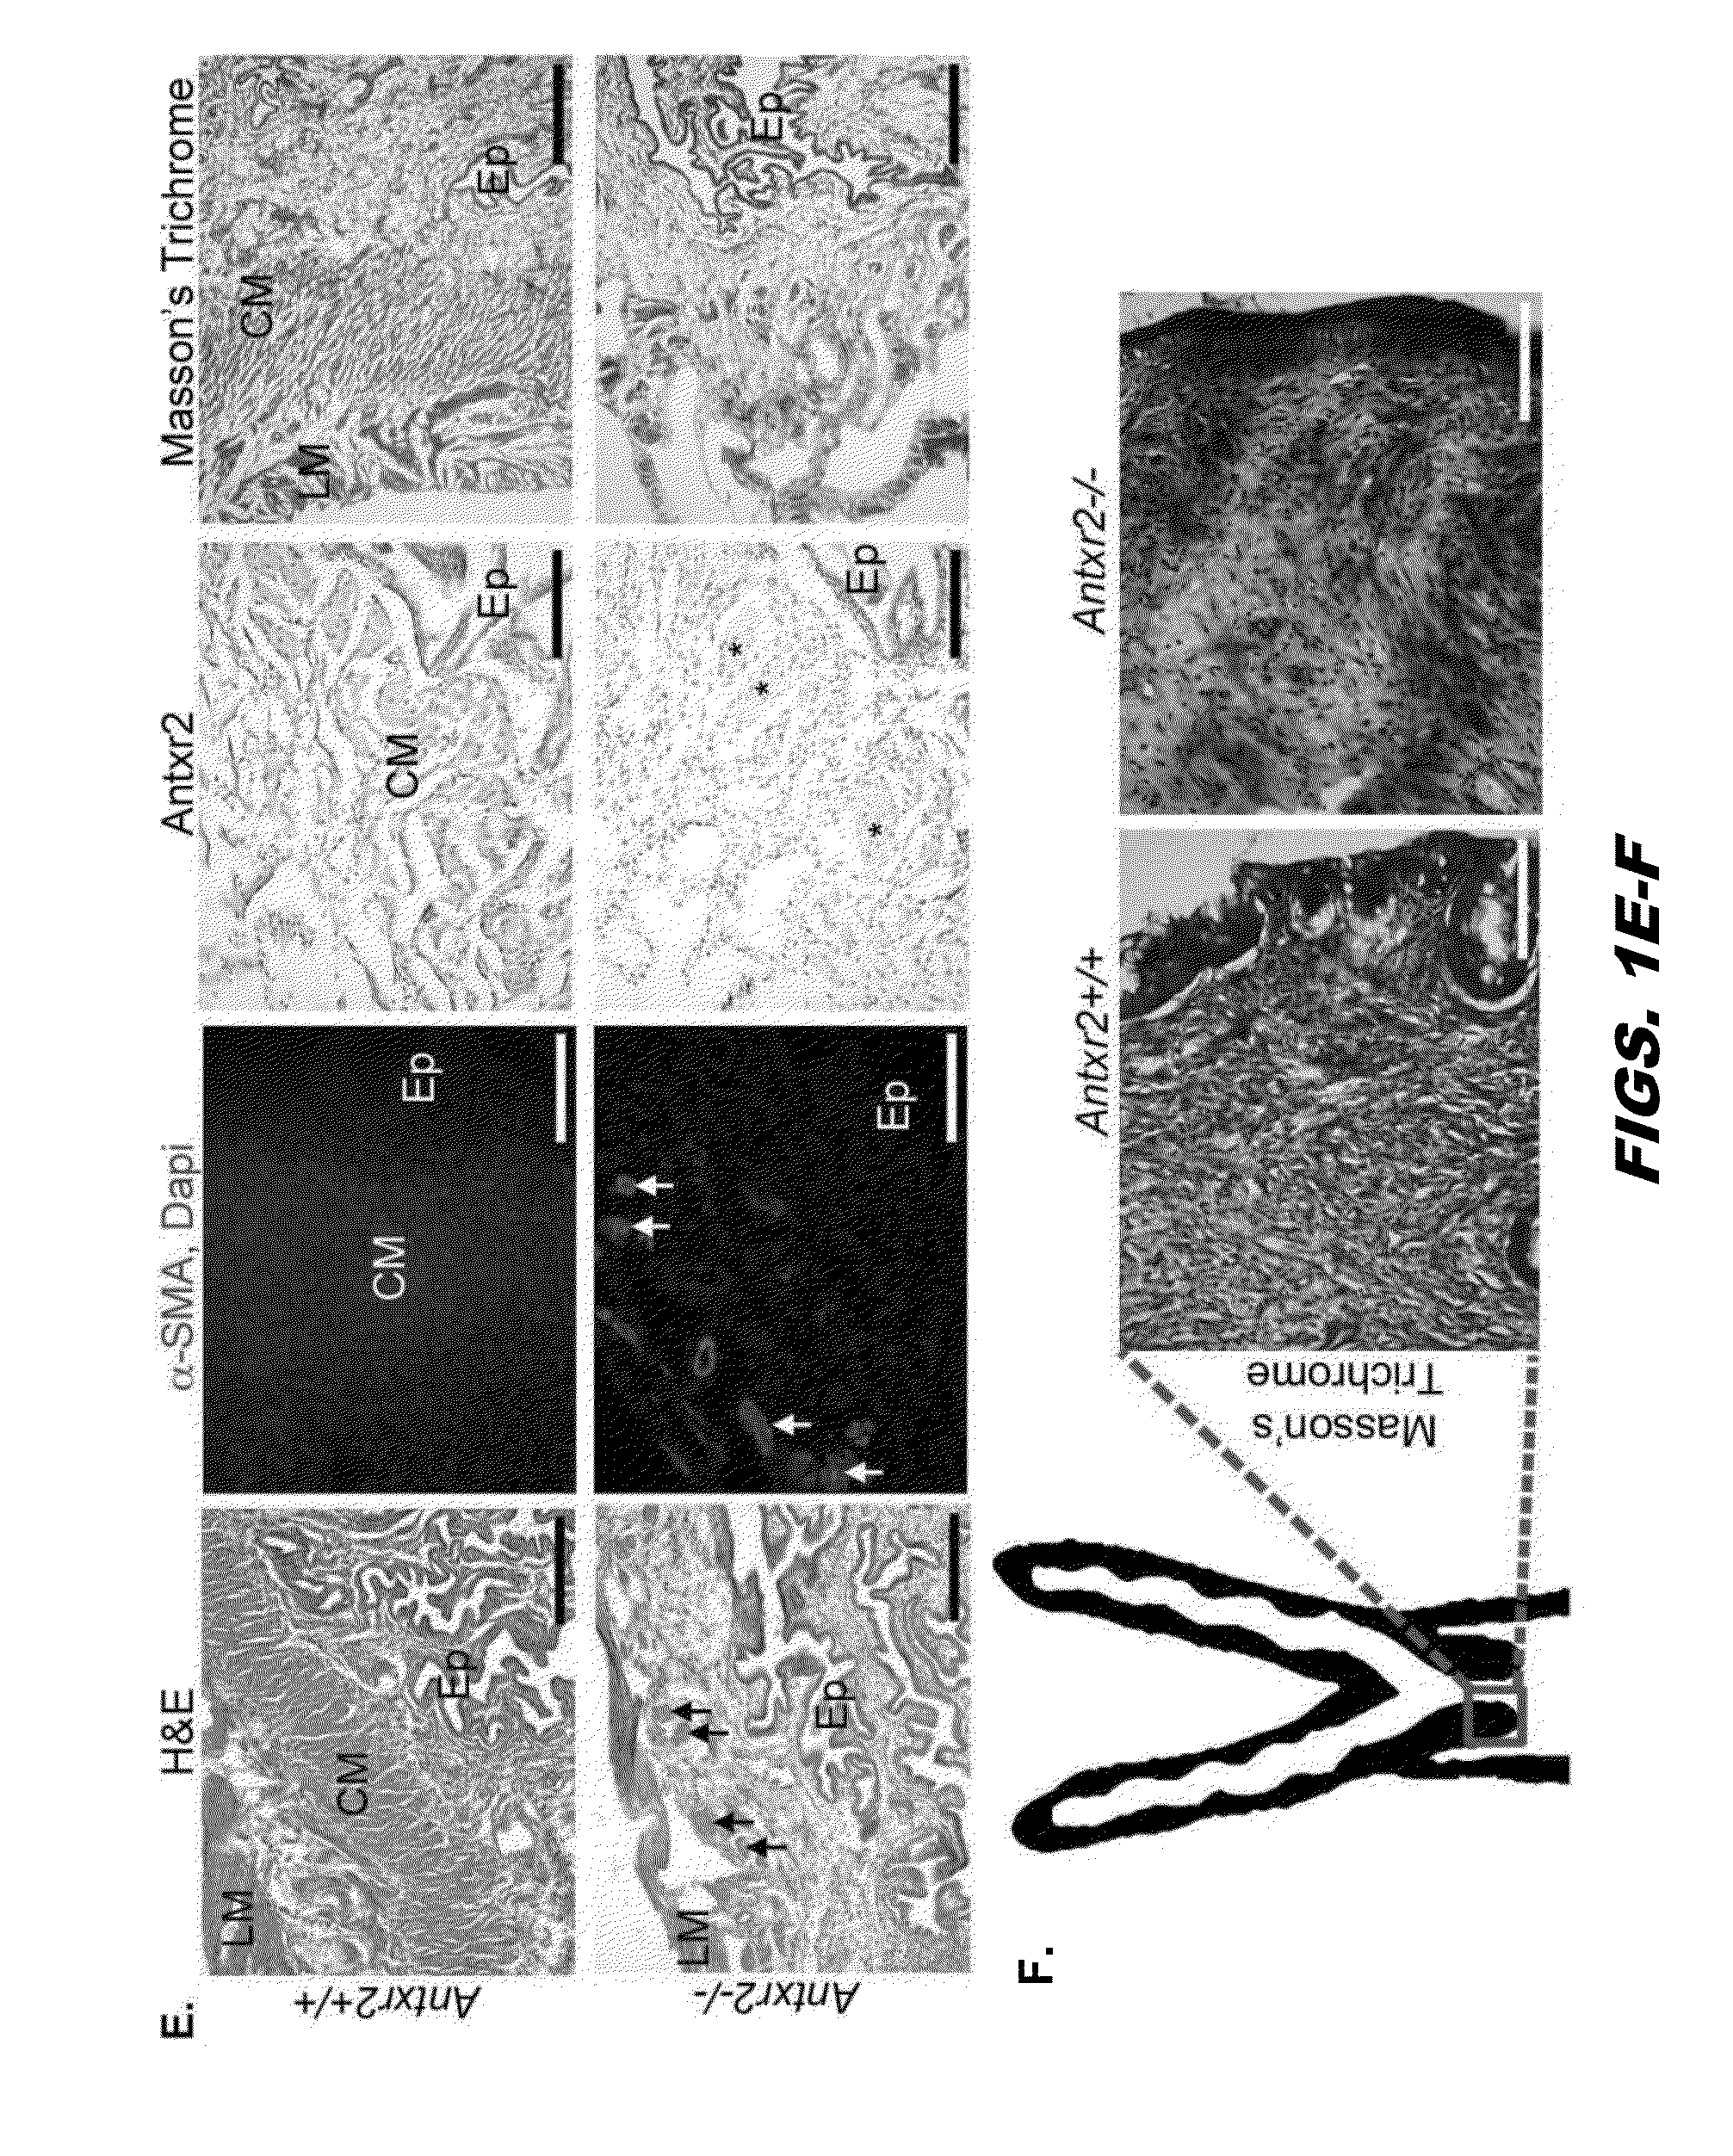 Fusion polypeptides and methods of use thereof